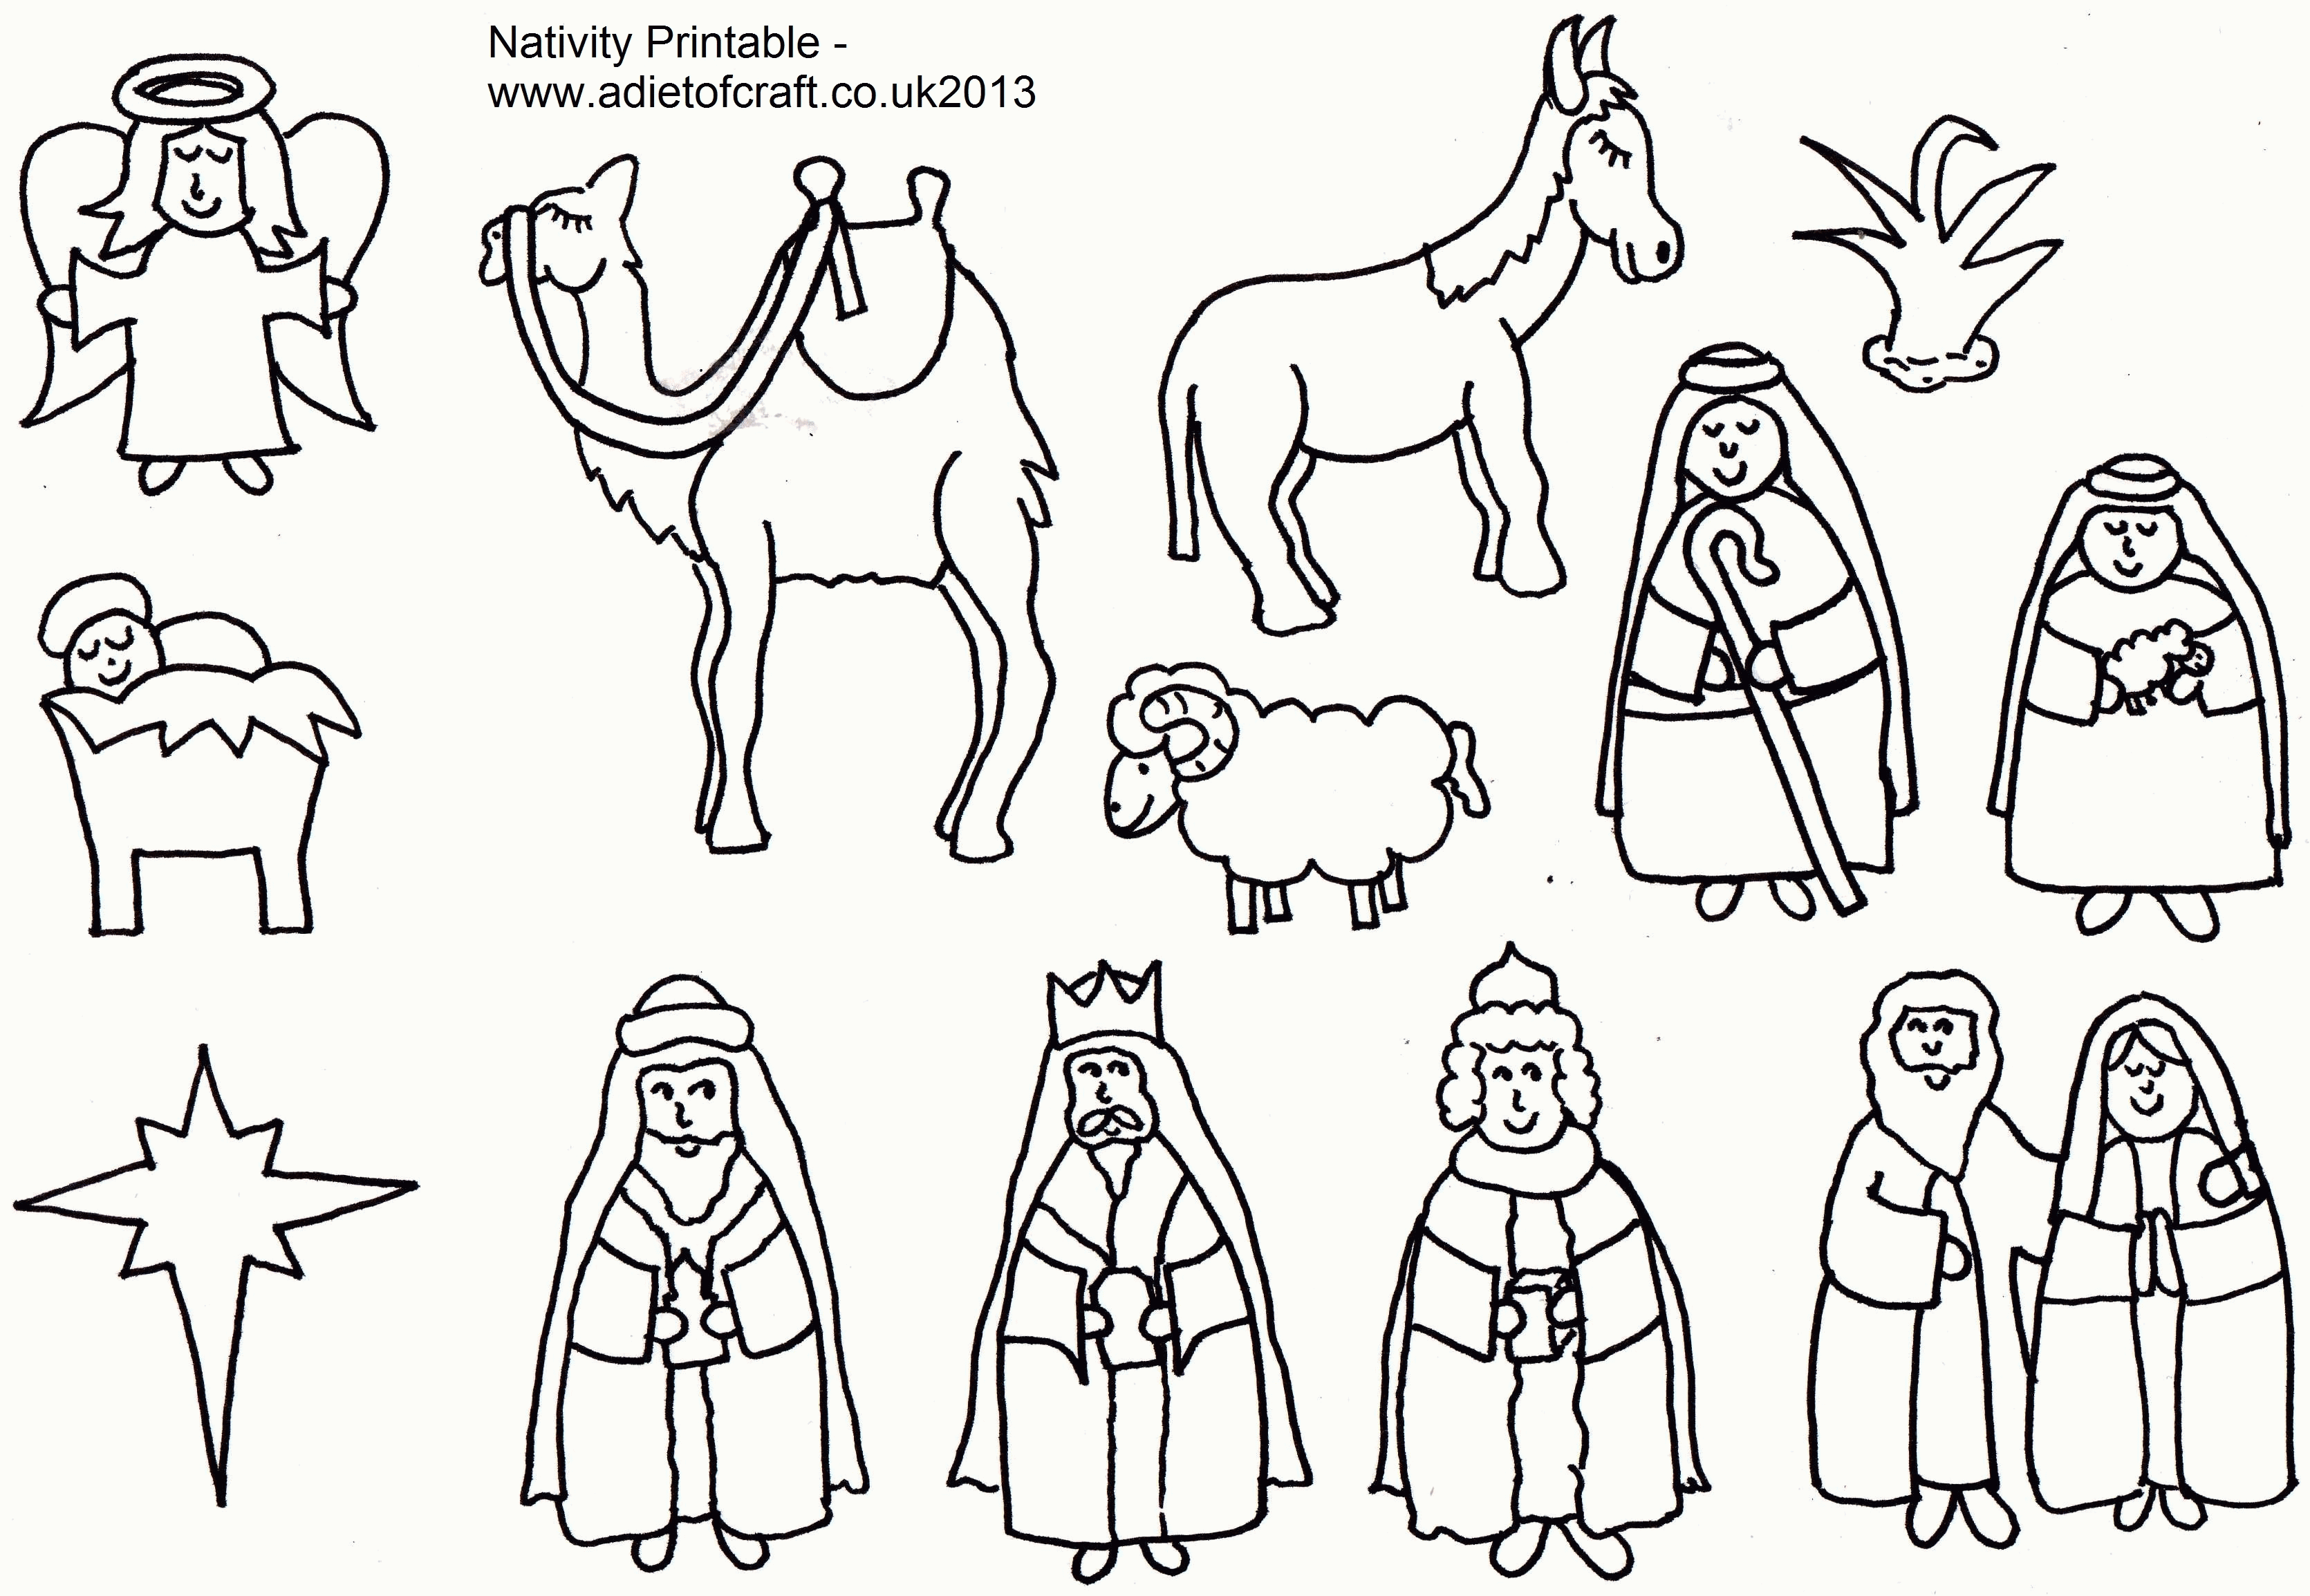 Free Printable Nativity Scene Coloring Pages - Templates Printable Download